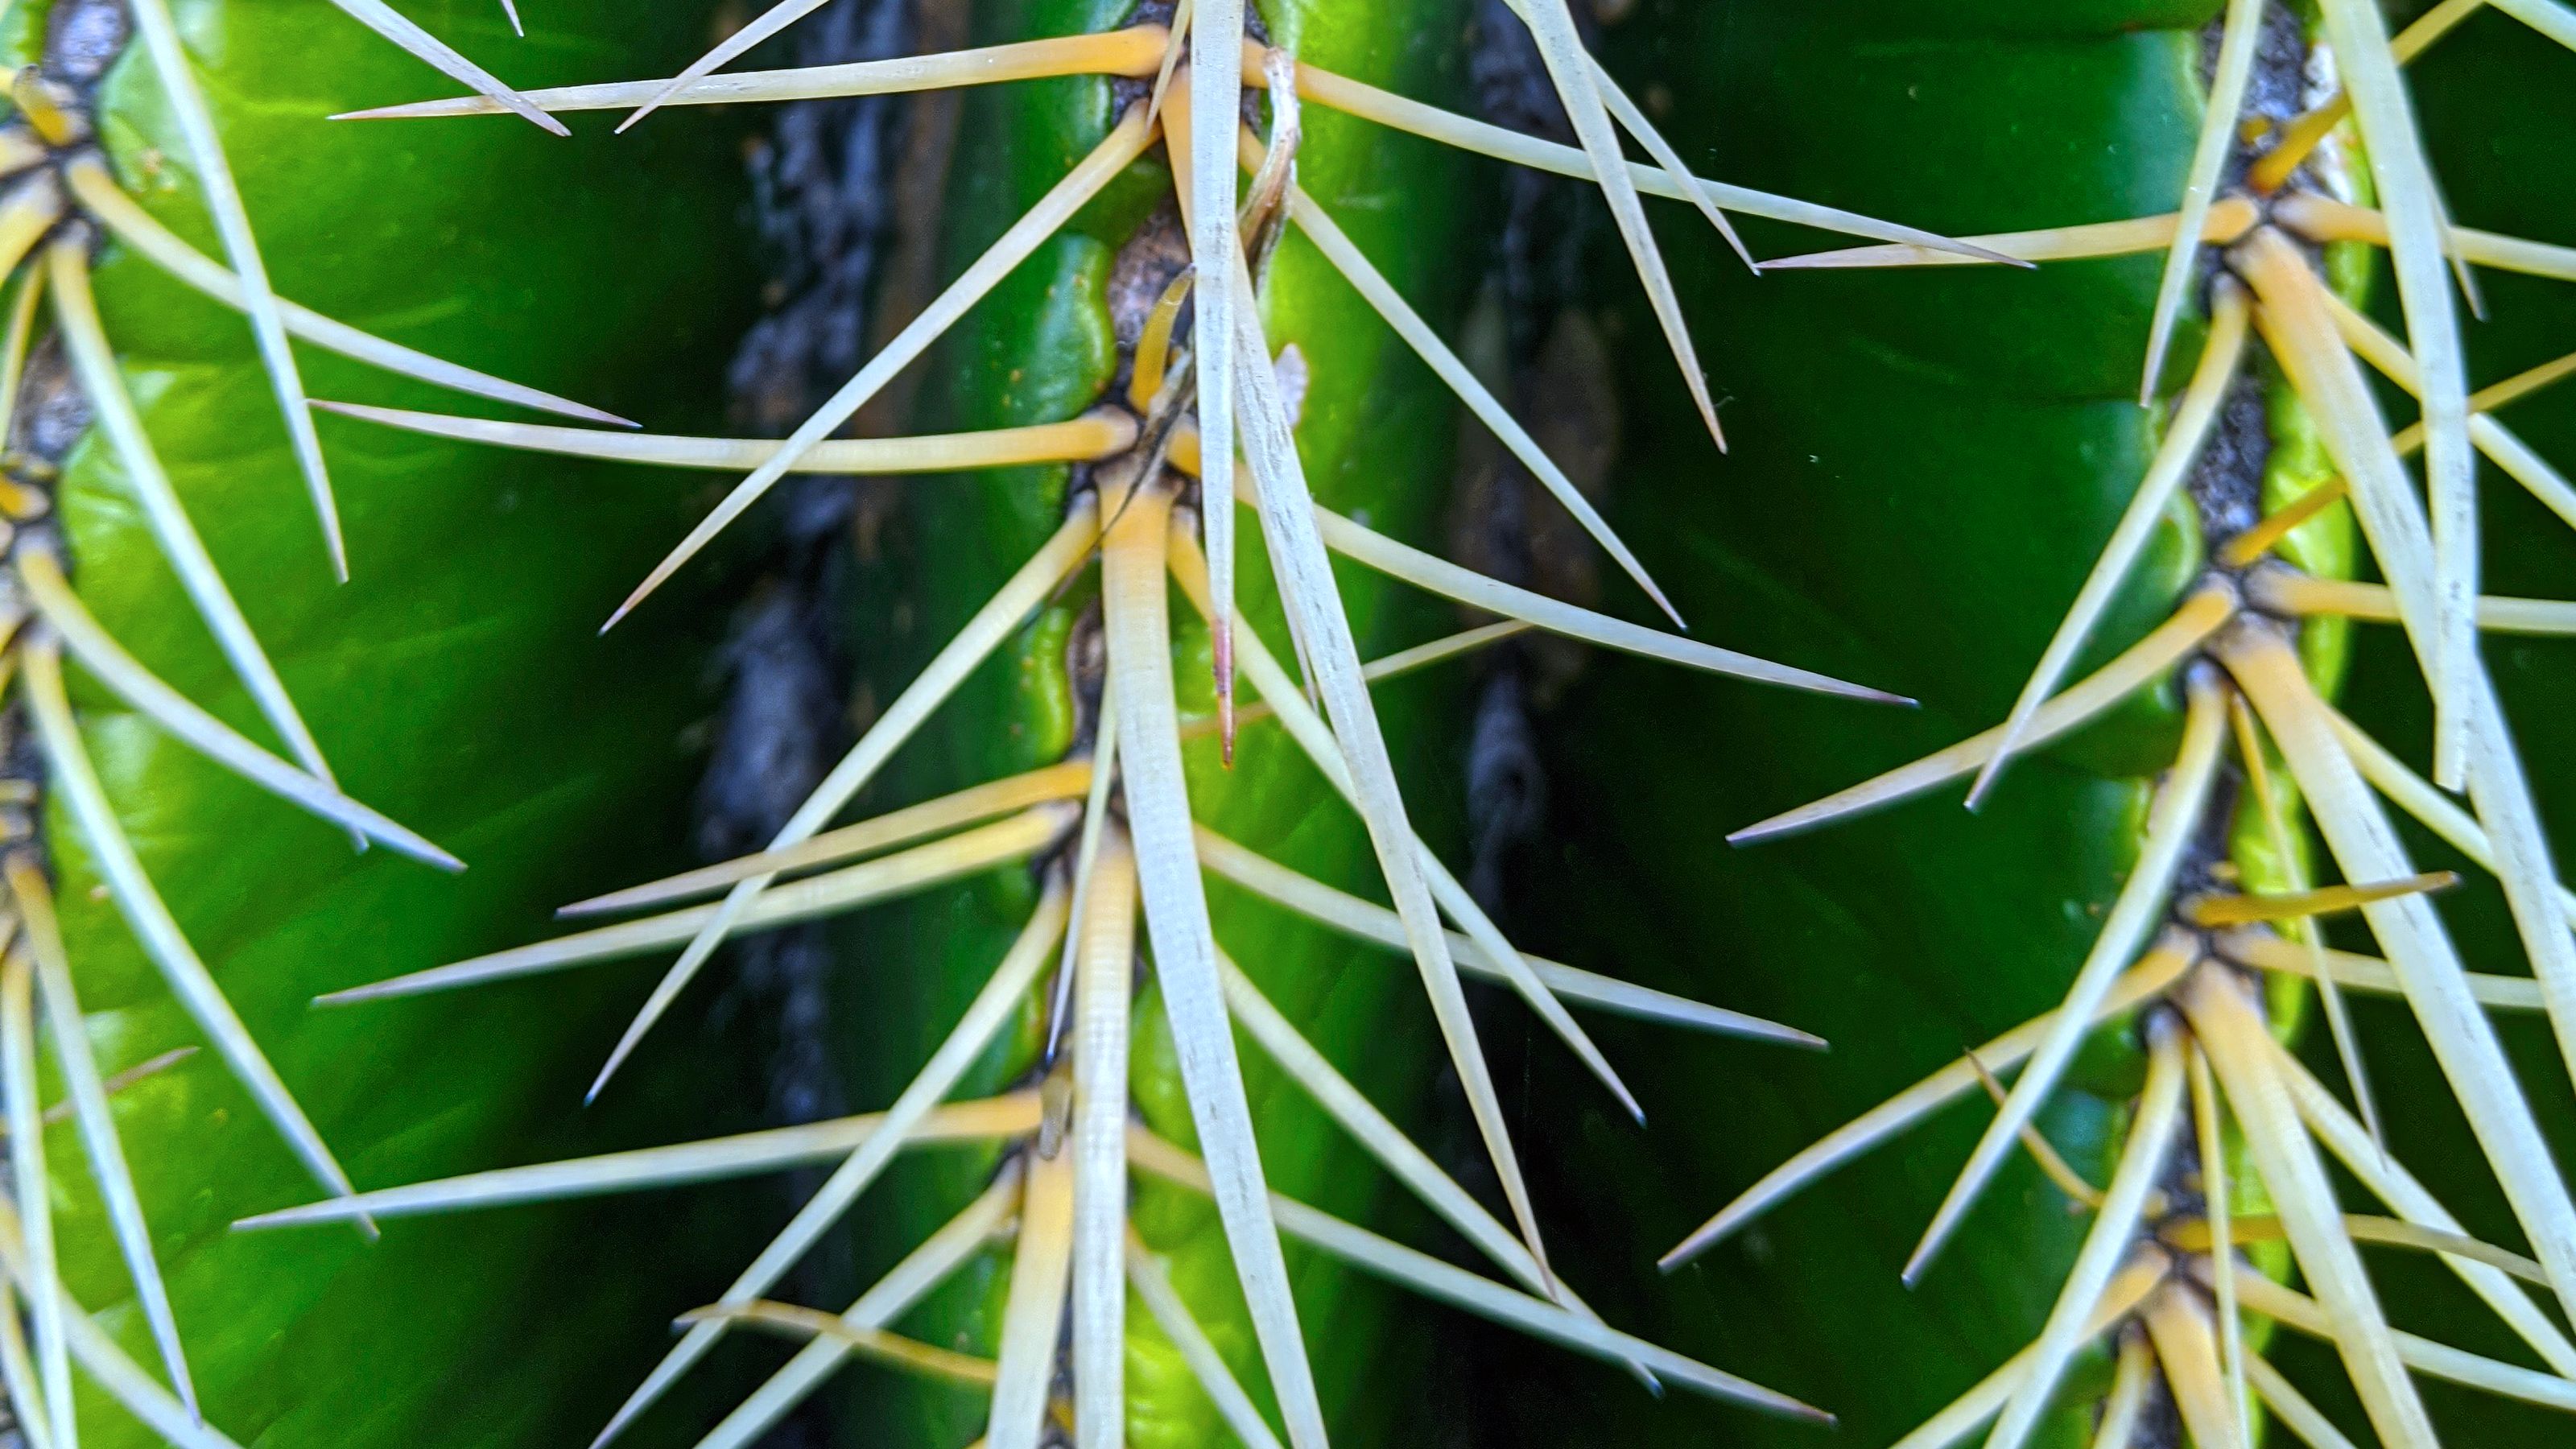 Close-up of a green cactus with long, thin, yellowish spines.